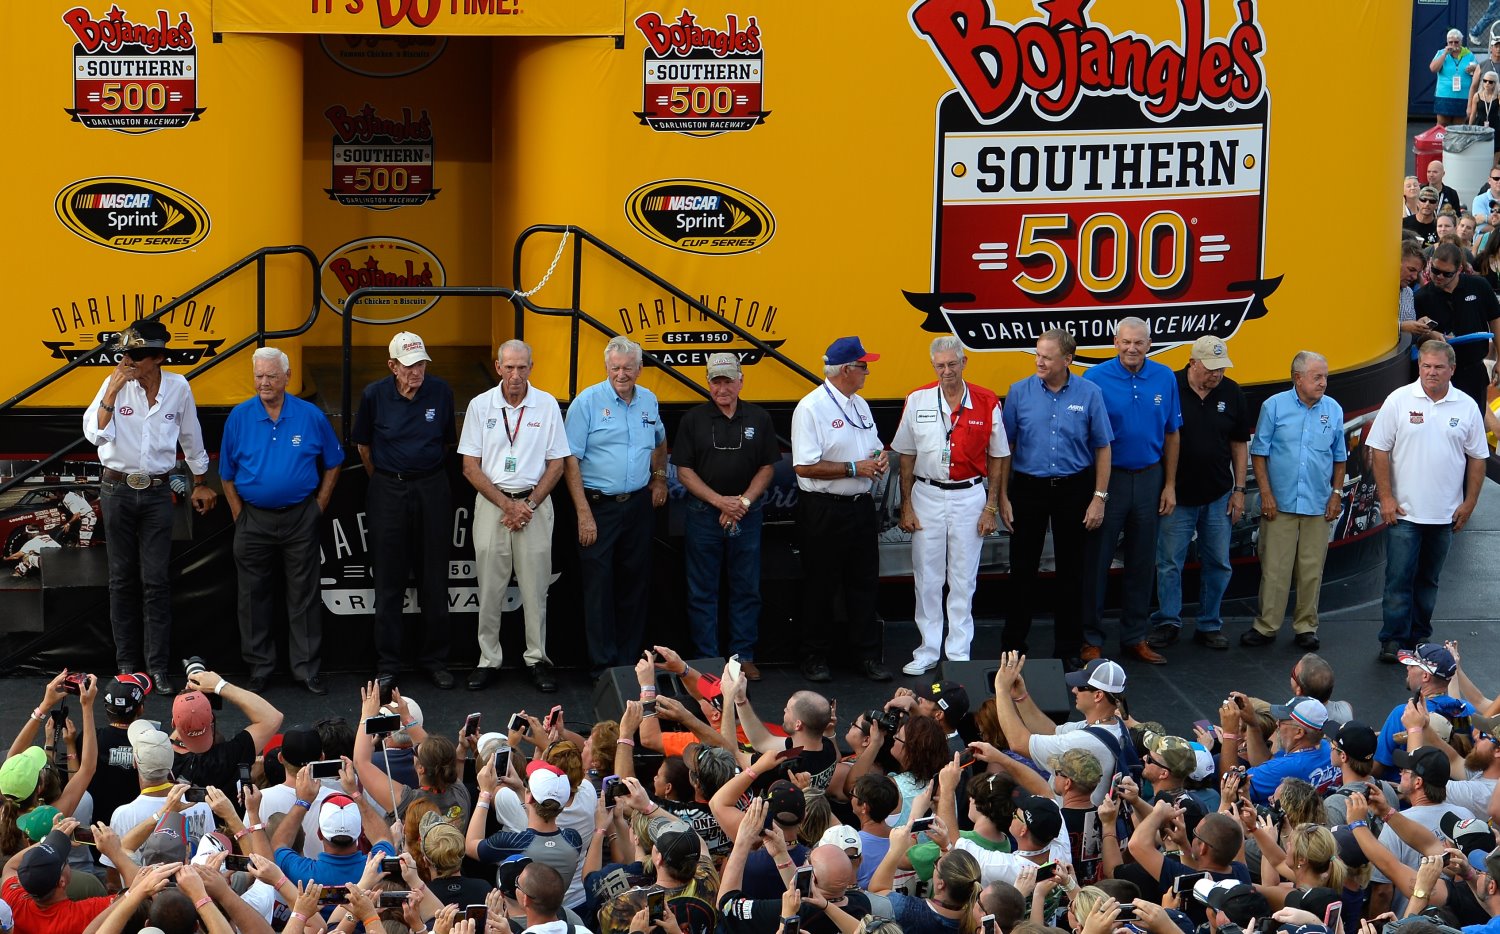 DARLINGTON, SC - SEPTEMBER 06: NASCAR Hall of Famers (L-R) Richard Petty, Junior Johnson, Bud Moore, Ned Jarrett, Bobby Allison, Cale Yarborough, Dale Inman, Leonard Wood, Rusty Wallace, Dale Jarrett, Jack Ingram, Rex White and Terry Labonte are honored during pre-race ceremonies forthe NASCAR Sprint Cup Series Bojangles' Southern 500 at Darlington Raceway on September 6, 2015 in Darlington, South Carolina. (Photo by Robert Laberge/NASCAR via Getty Images)